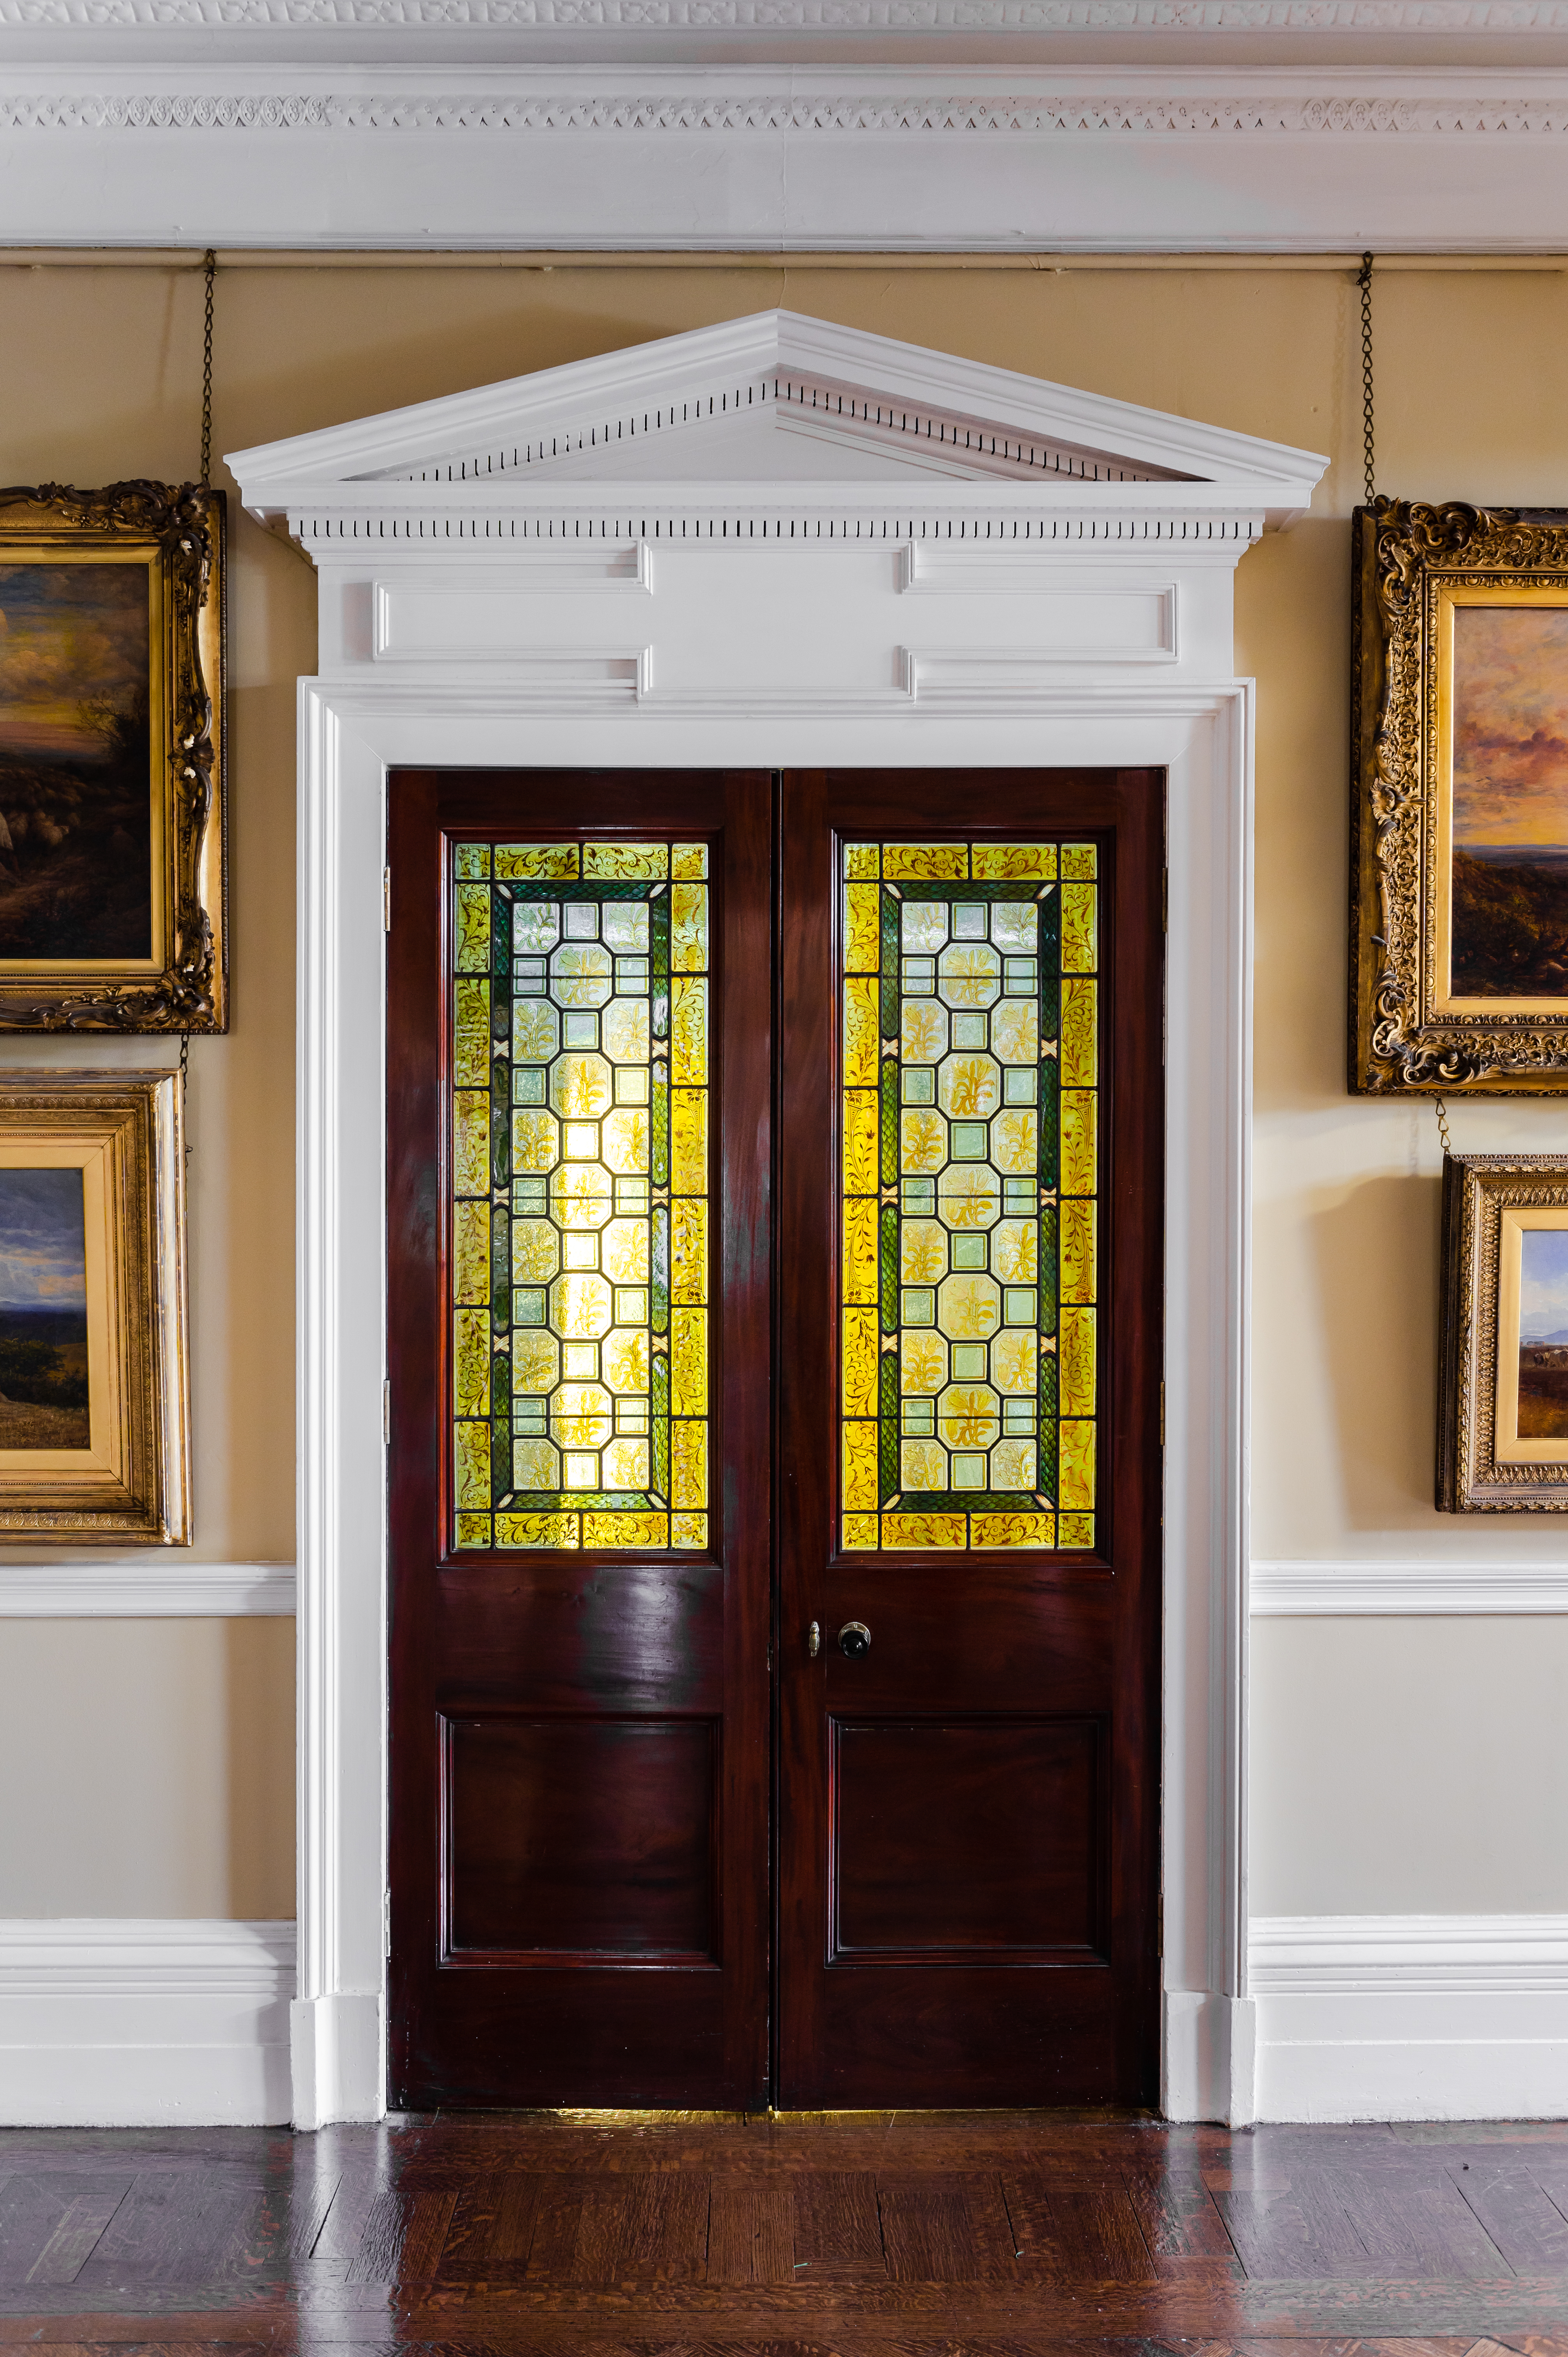 Entrance hall doors, yellow and green stained glass